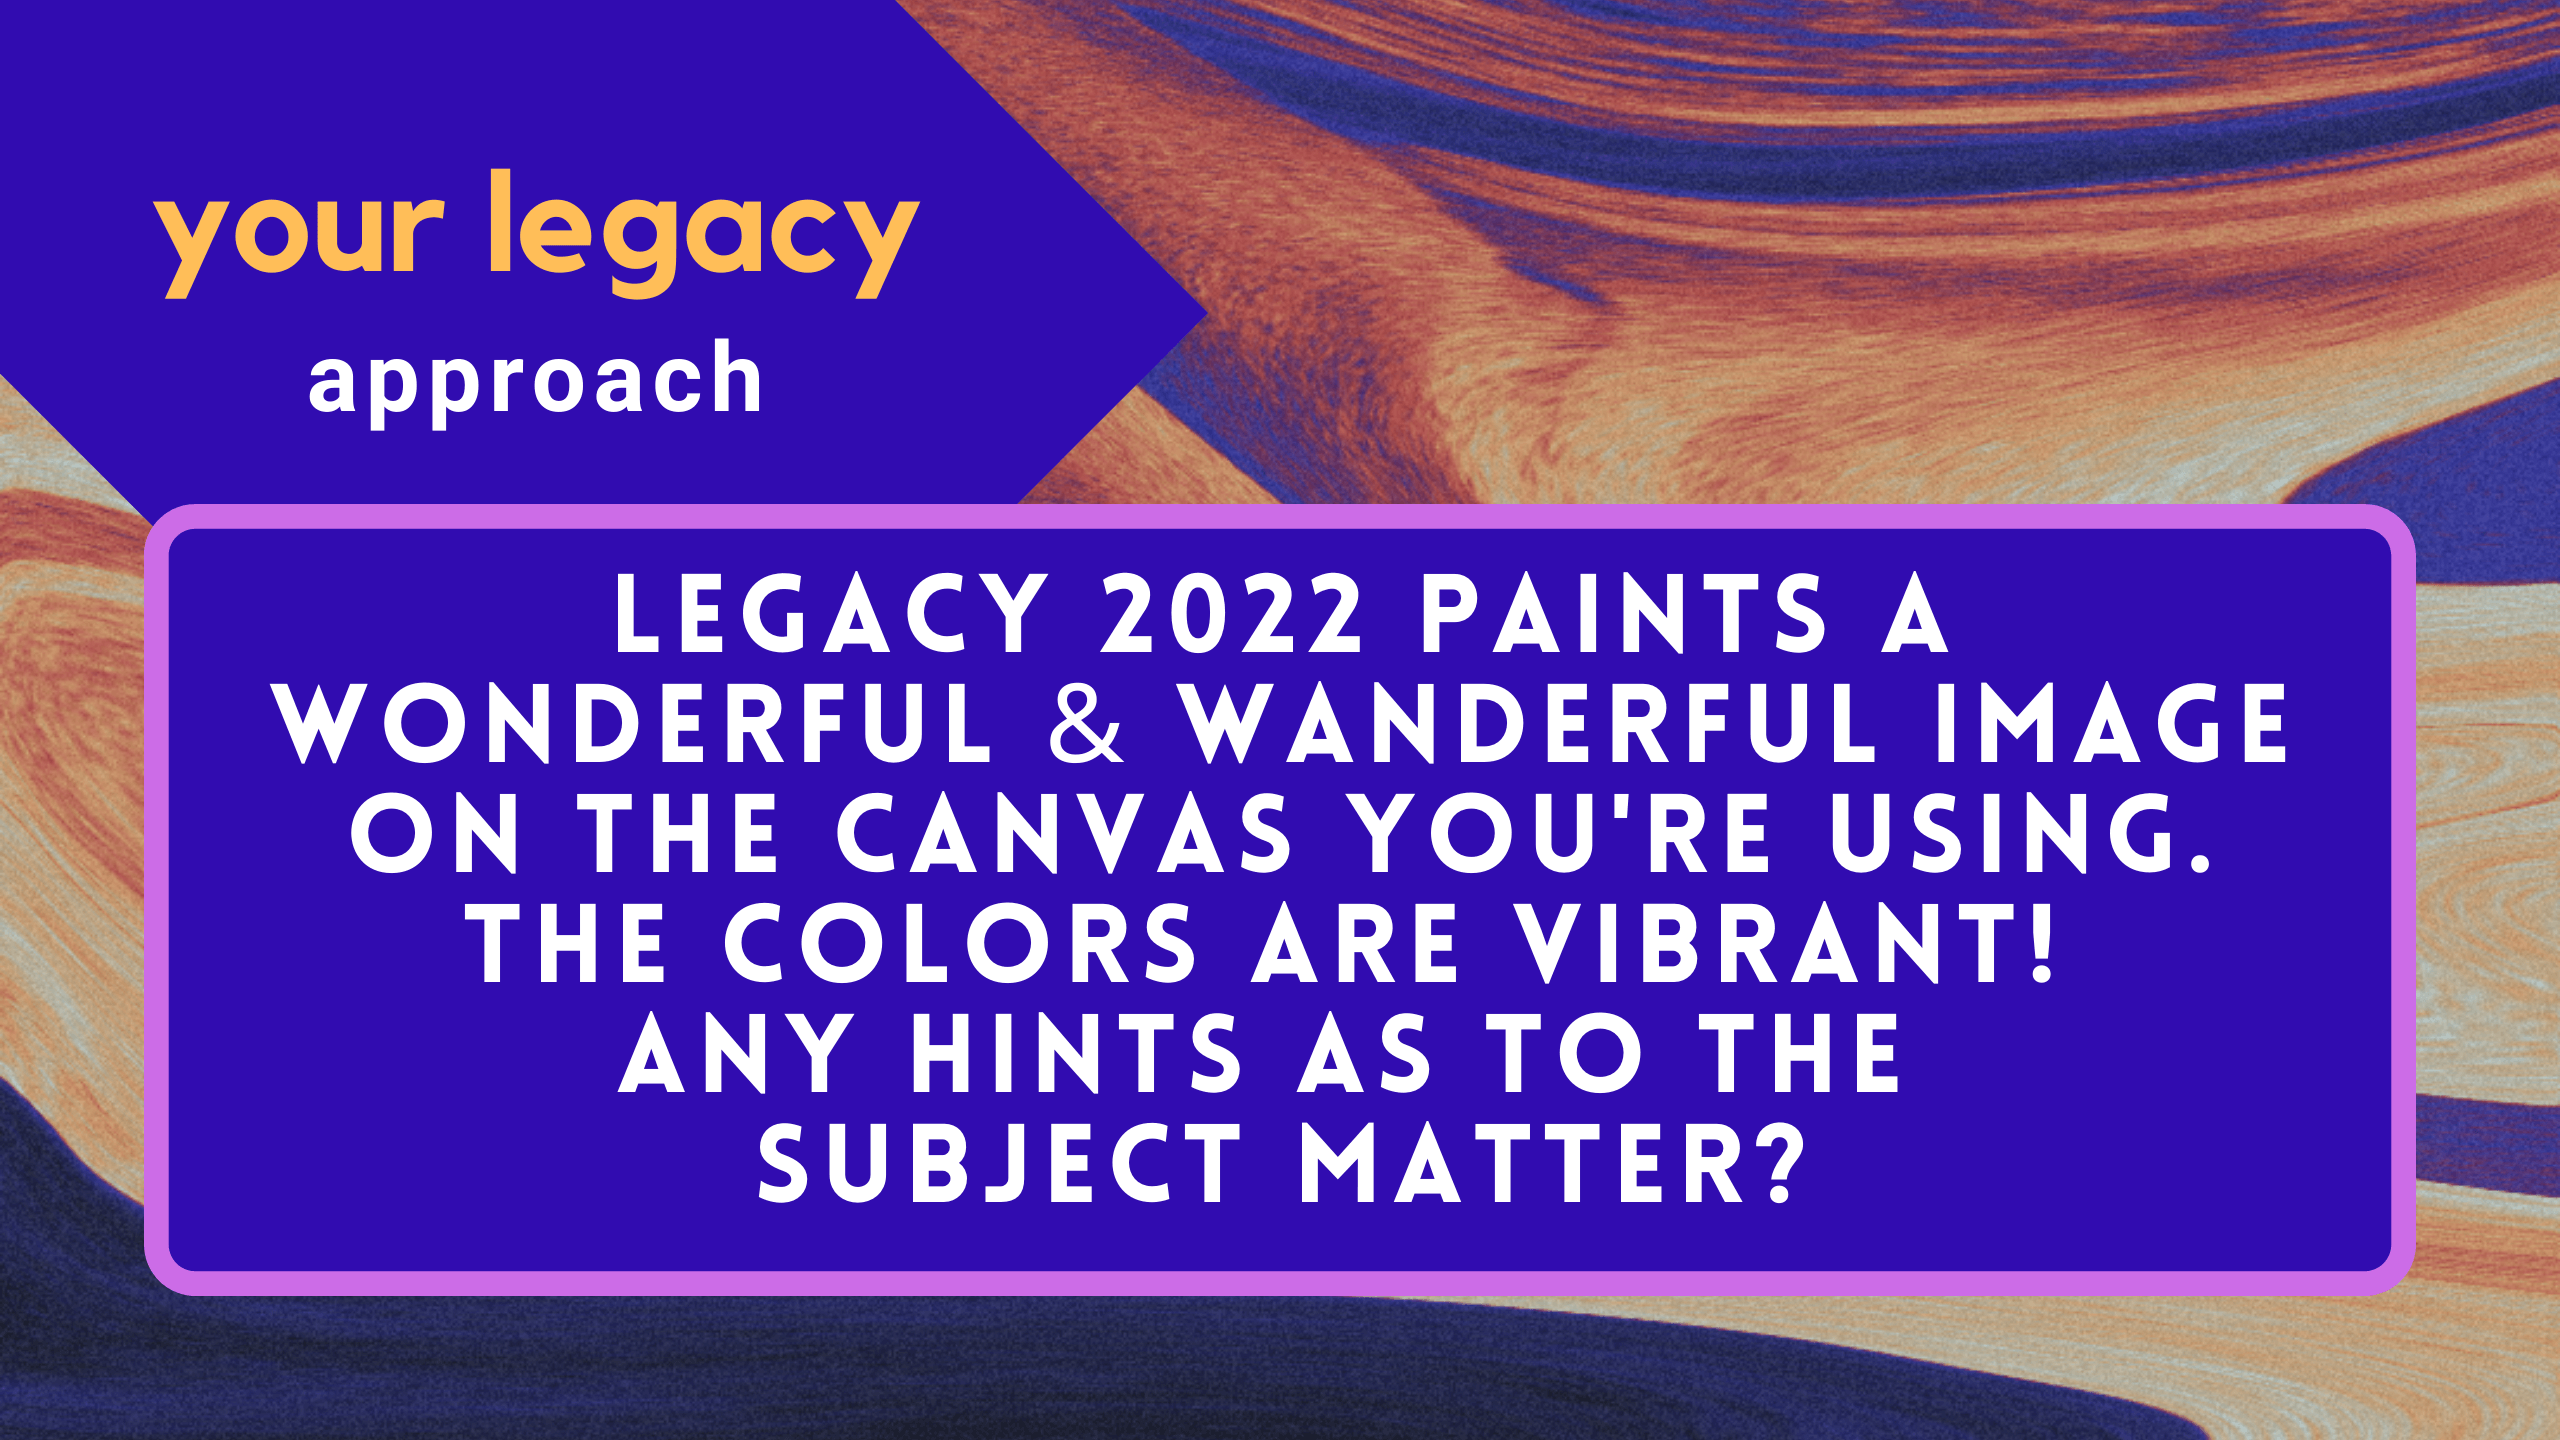 Legacy 2022 Project Considerations